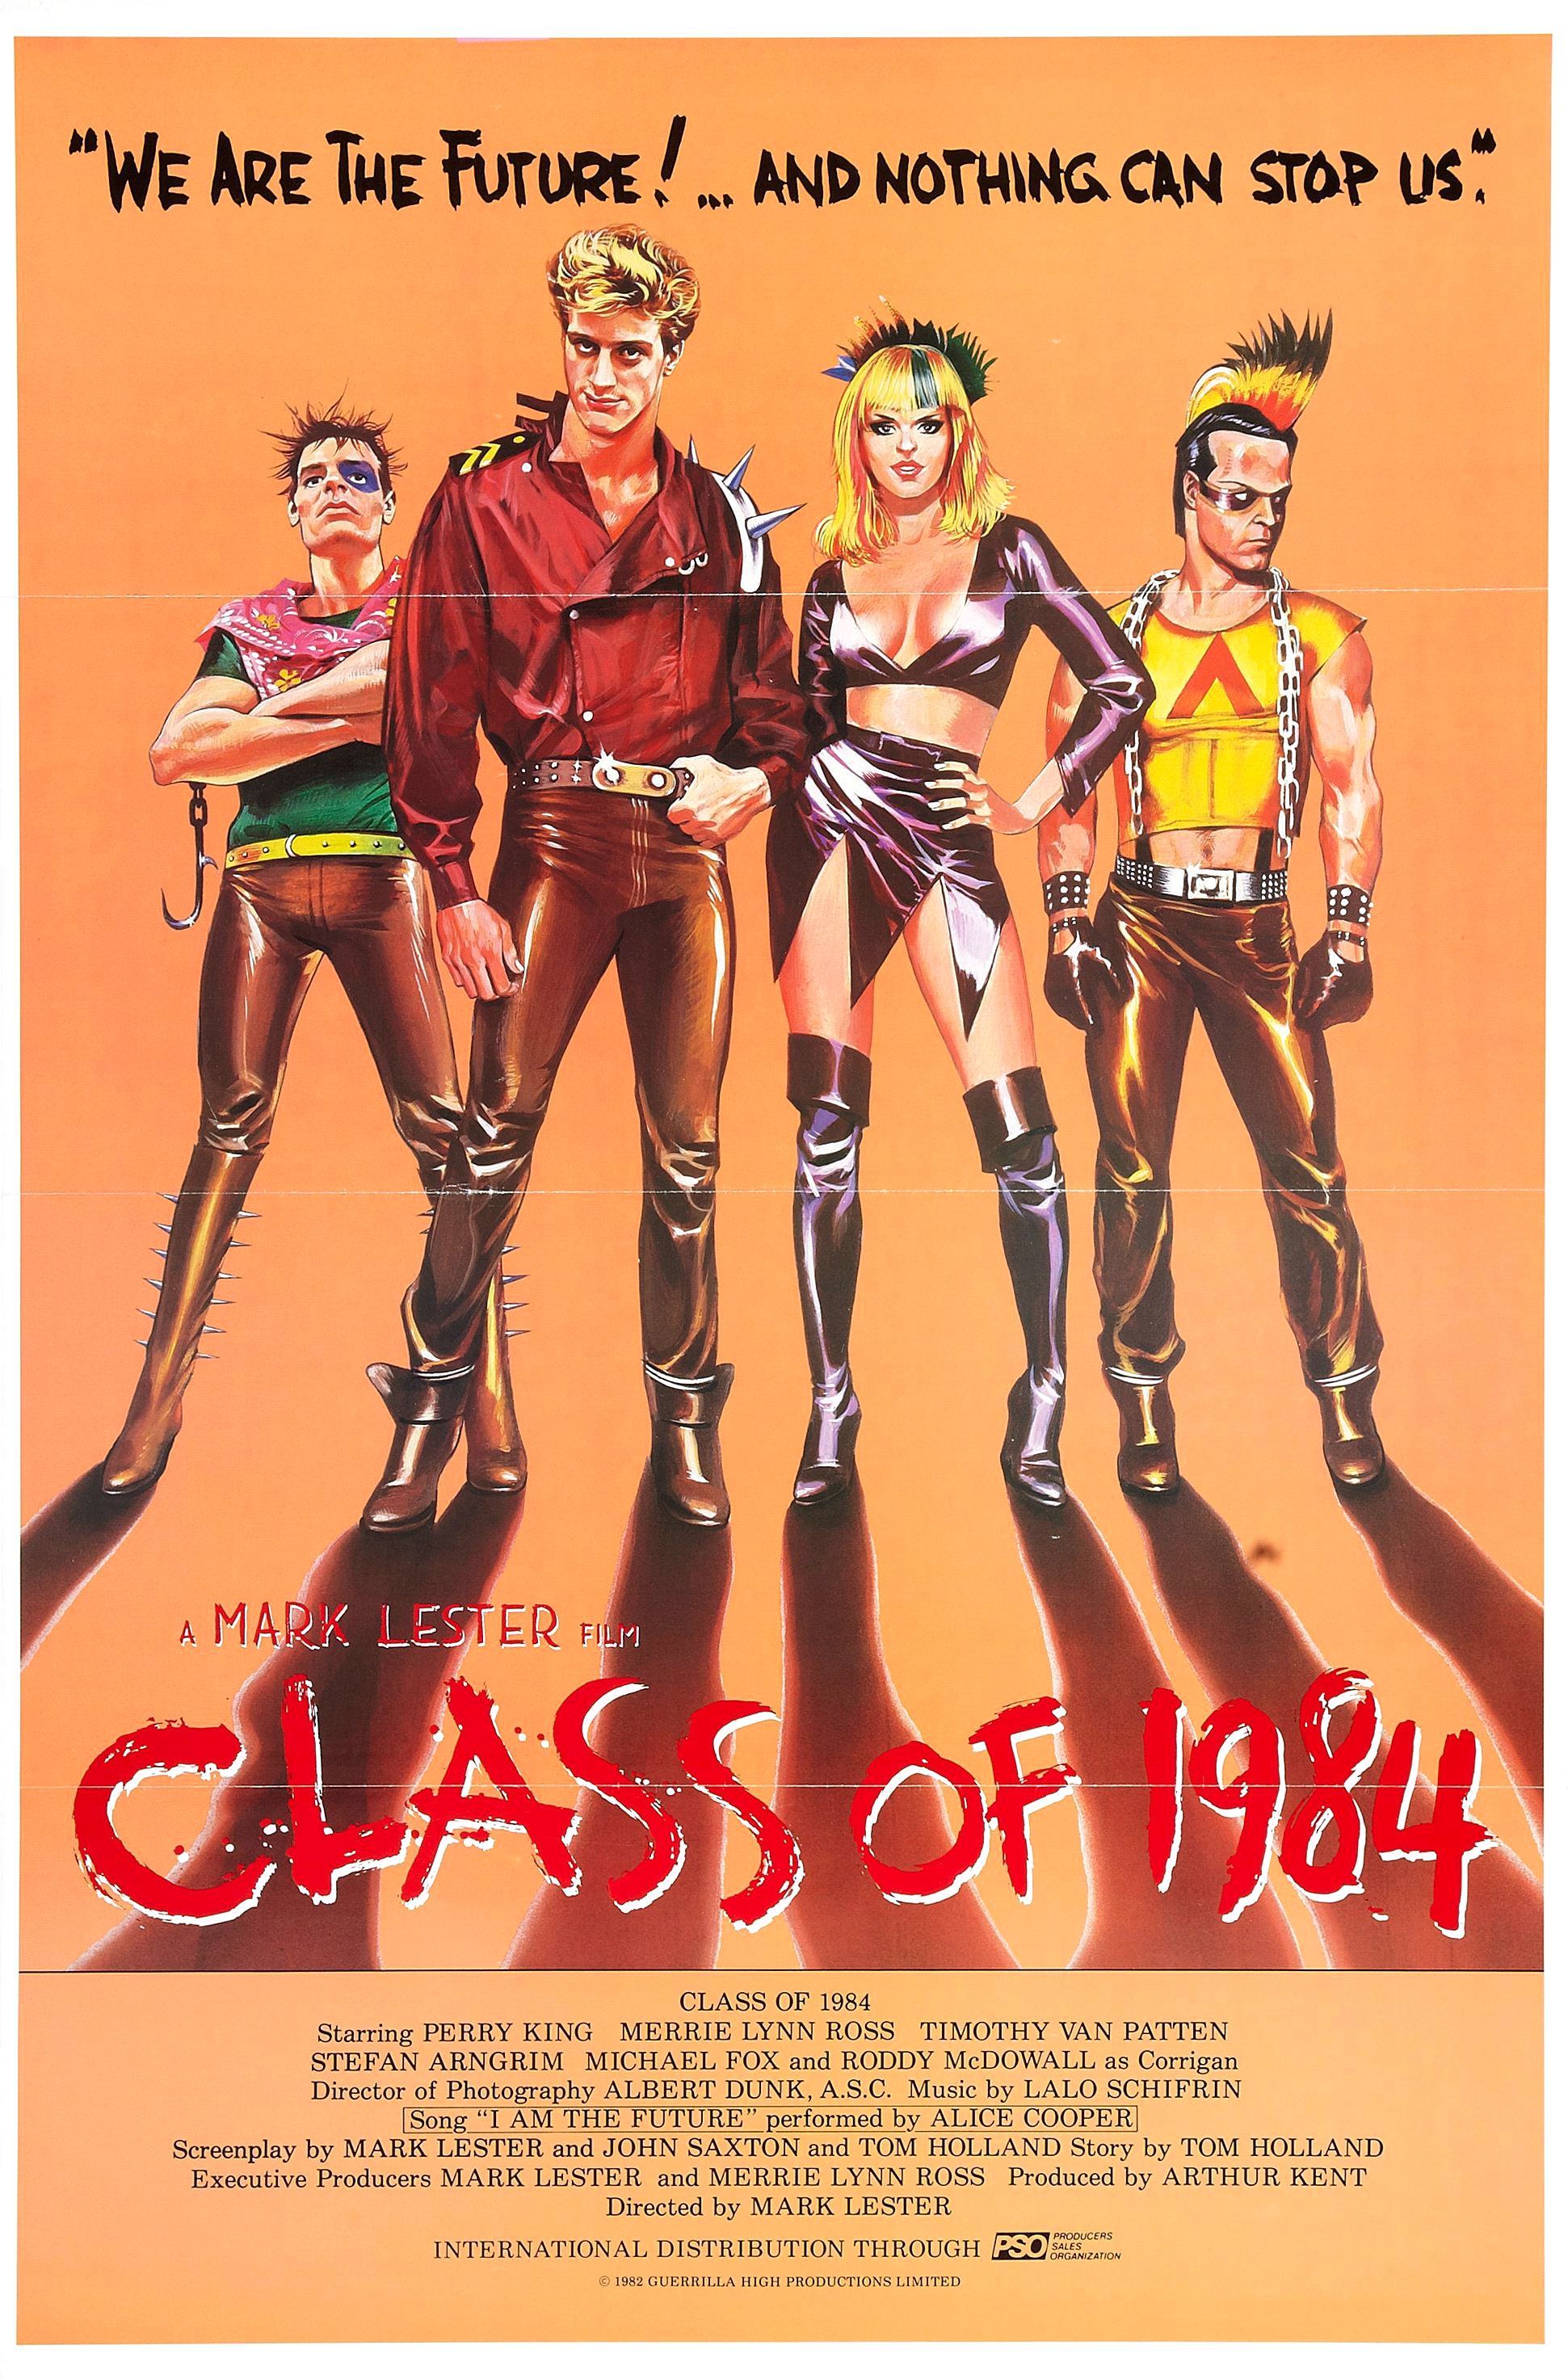 Big and Cheesy 80's Movie Posters